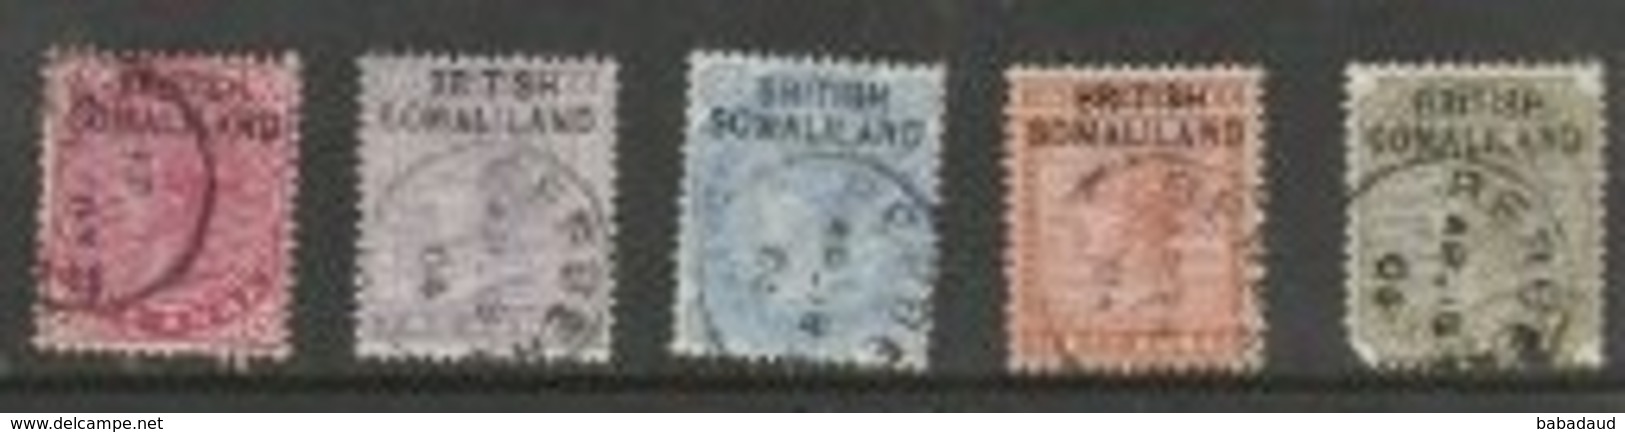 BRITISH SOMLILAND Opt On 1a, 2a, 2 12a, 3a, 4 Annas Of India, Used BERBERA AP 18 04 C.d.s. - Somaliland (Protectorate ...-1959)